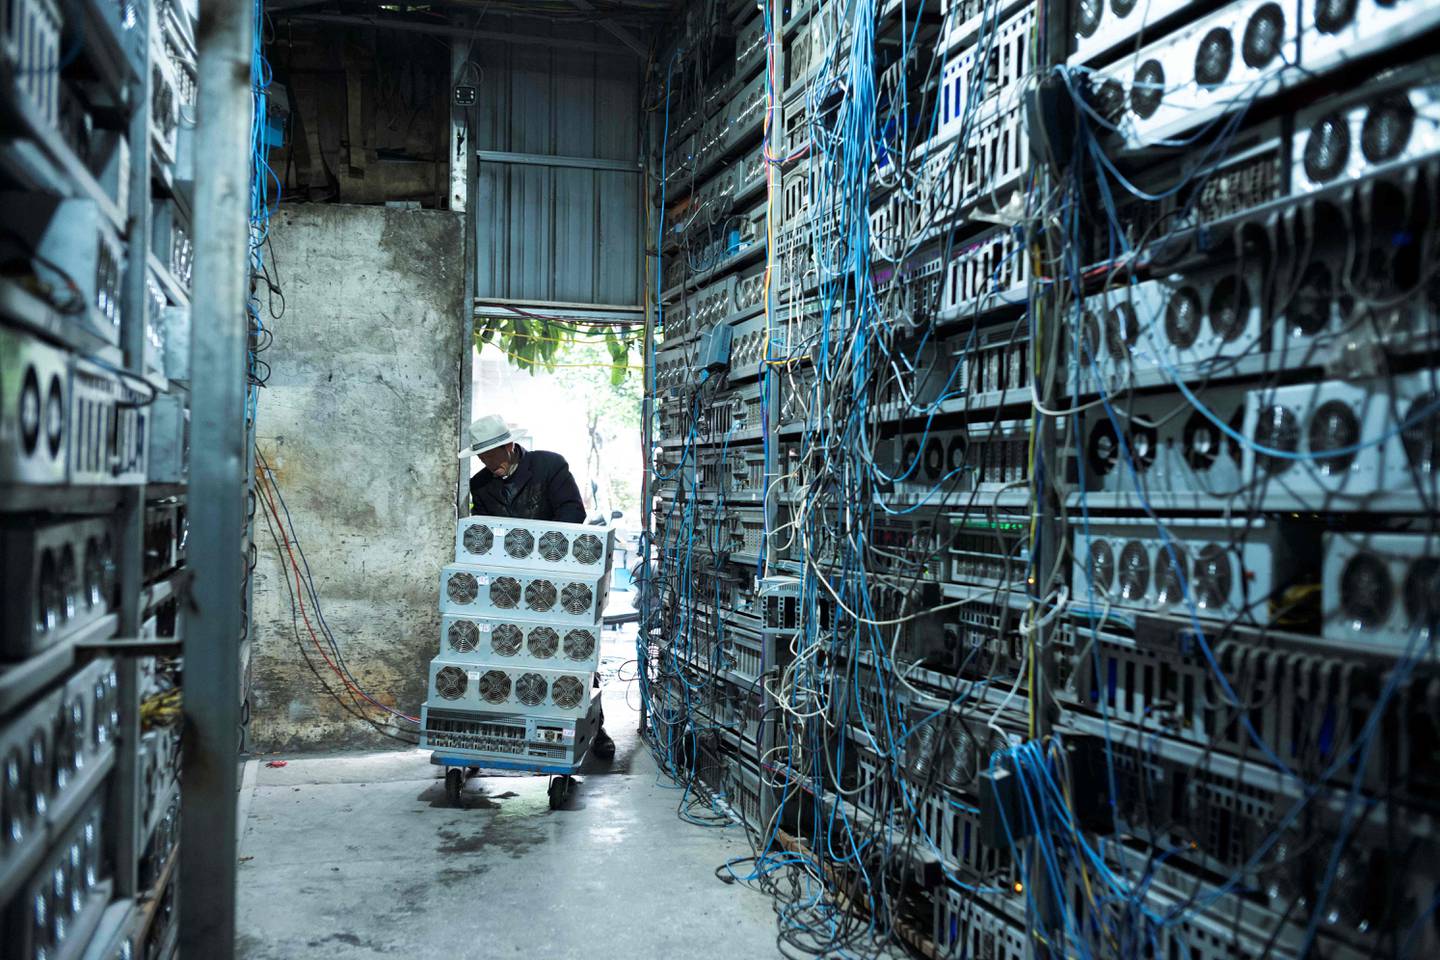 Mining cryptocurrencies is extremely energy intensive. AFP